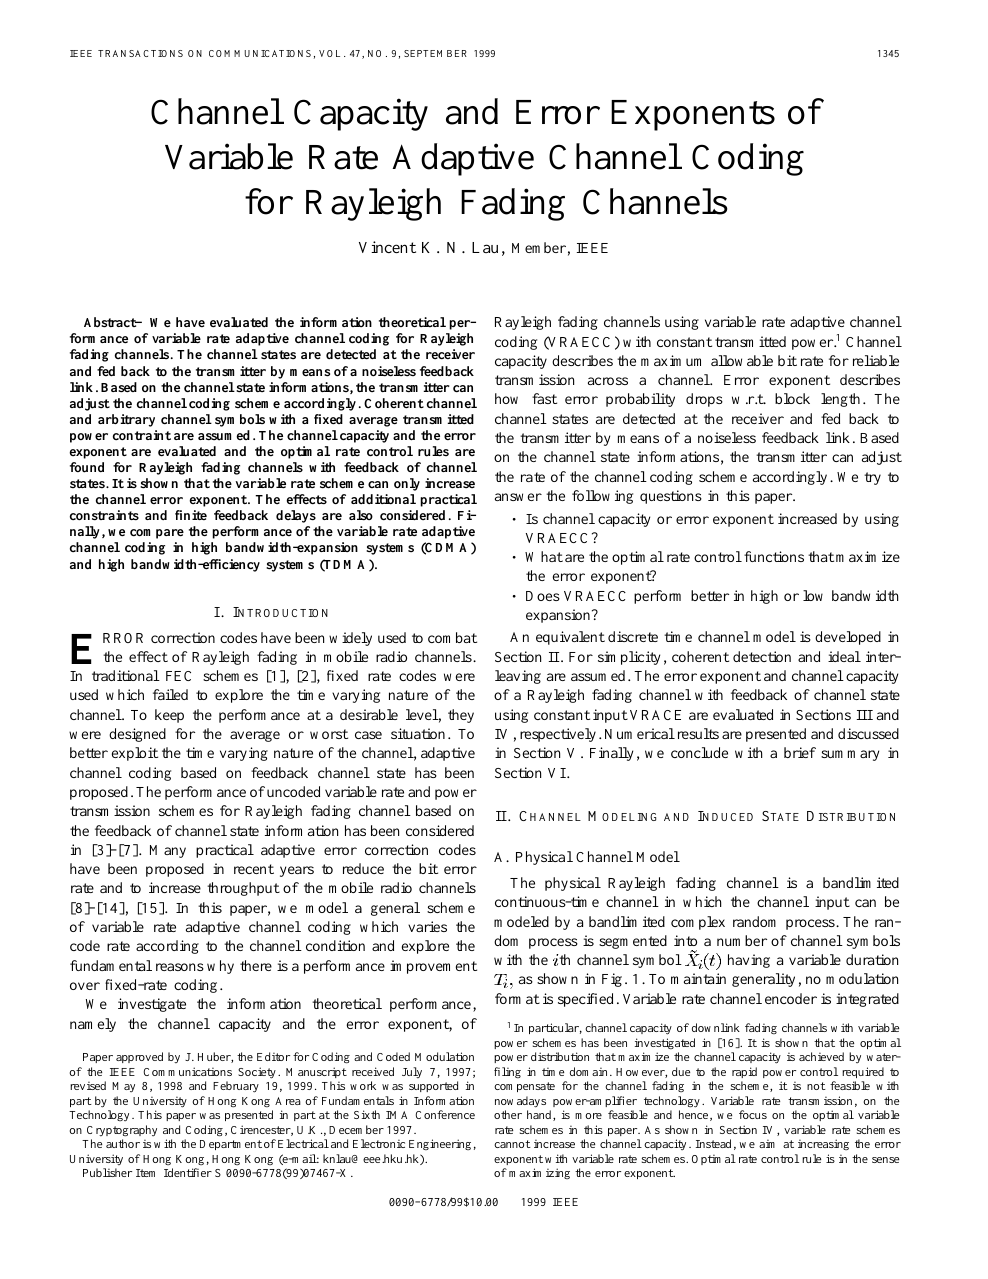 Channel Capacity And Error Exponents Of Variable Rate Adaptive Channel Coding For Rayleigh Fading Channels Topic Of Research Paper In Computer And Information Sciences Download Scholarly Article Pdf And Read For